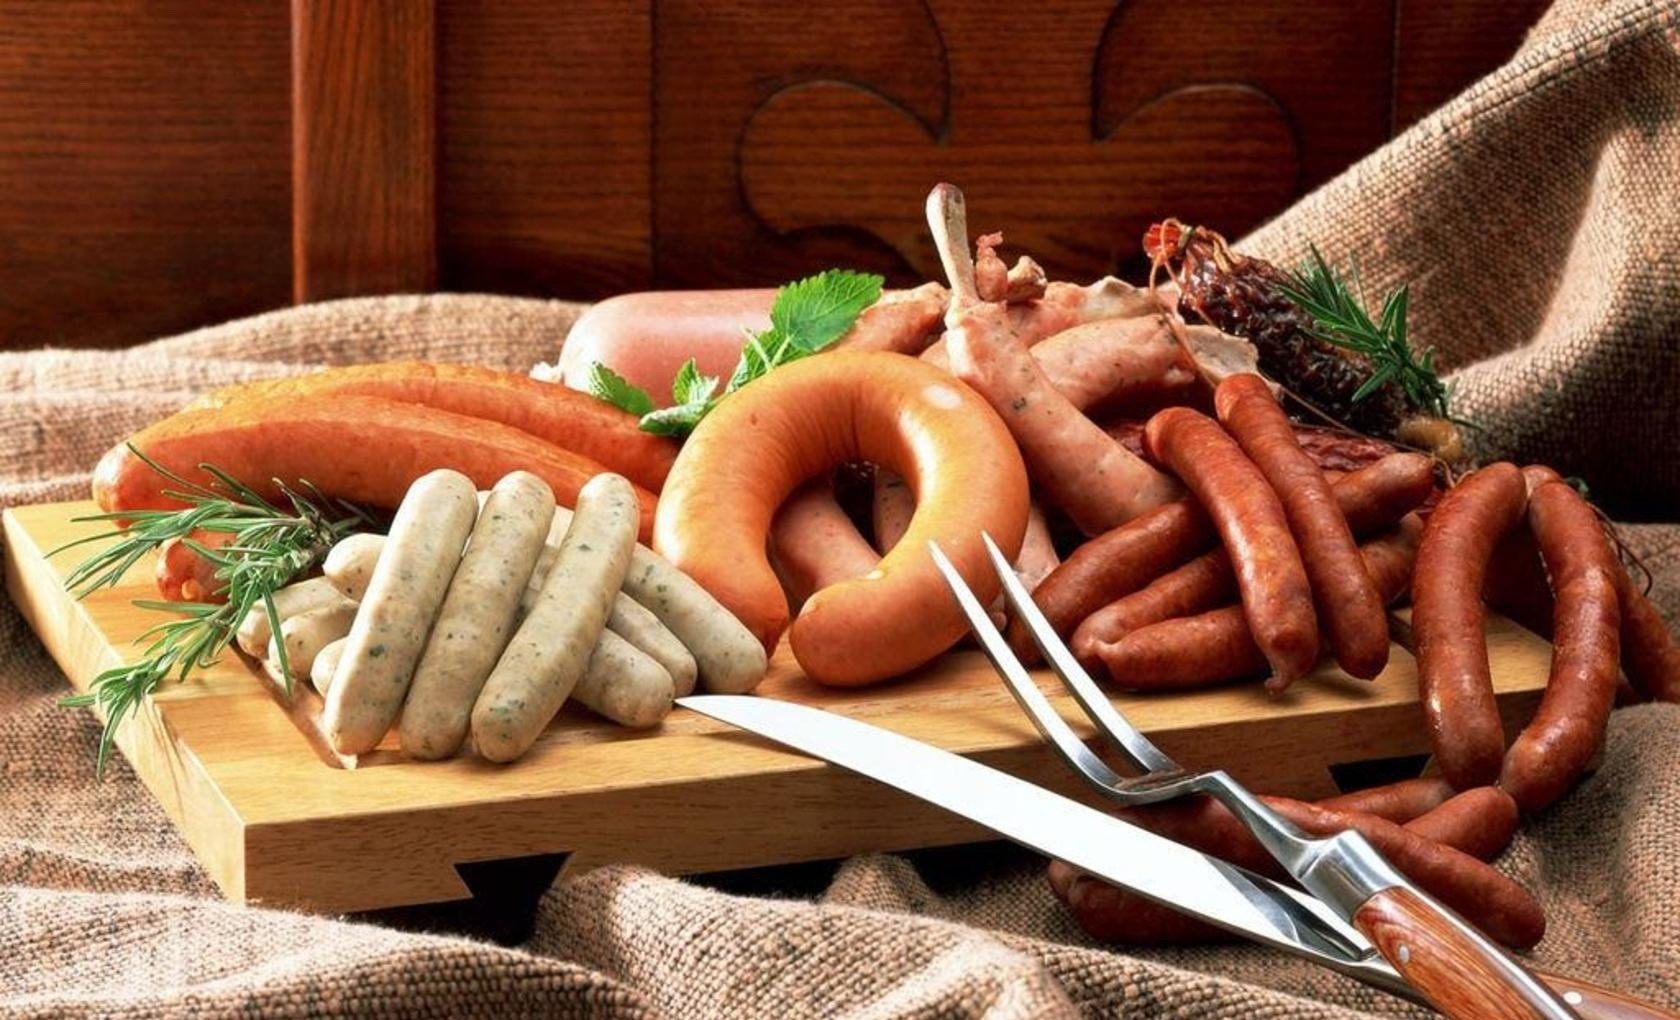 Image Vienna Sausage Food Meat Products